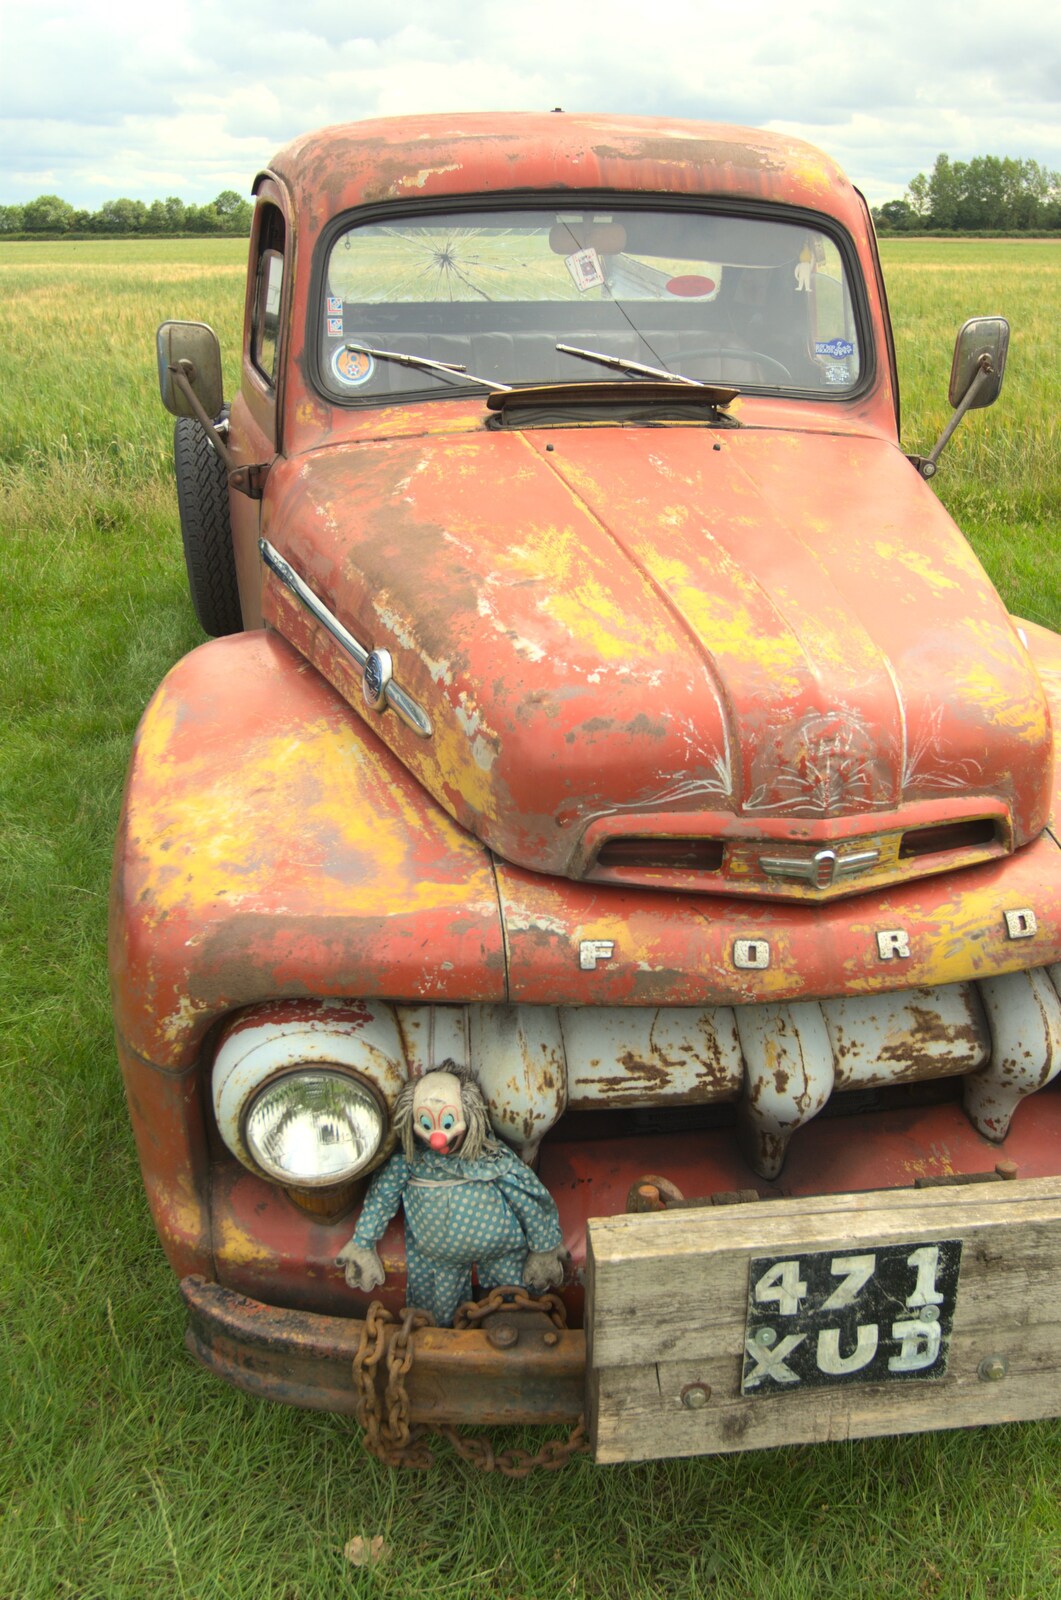 A horror-film-inspired Ford pick-up truck from Maurice's Mustang Hangar Dance, Hardwick Airfield, Norfolk - 16th July 2011